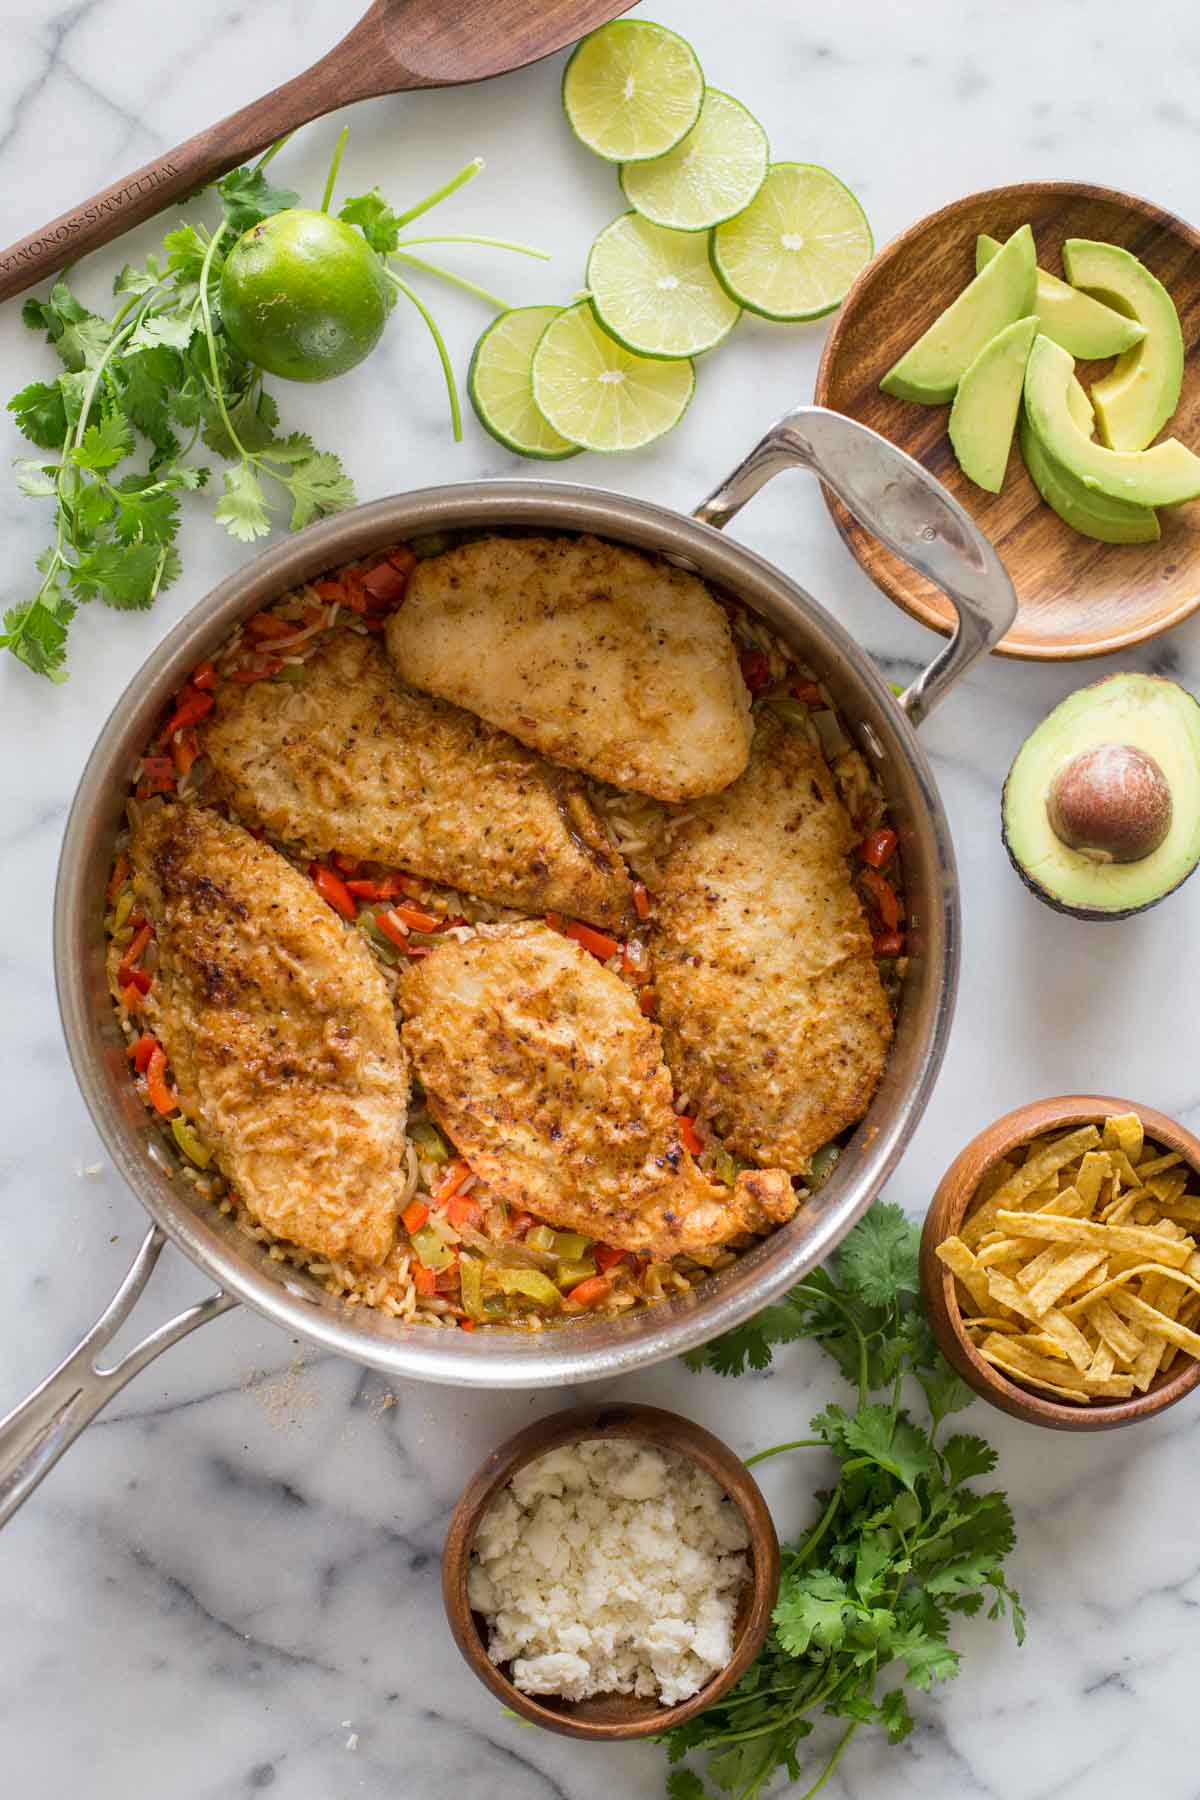 One Skillet Fajita Style Chicken and Rice, with a little bowl of crumbled queso fresco, fresh cilantro, a small bowl of tortilla strips, a half of an avocado, a plate of sliced avocado, some slices of lime, and a whole lime next to the skillet. 